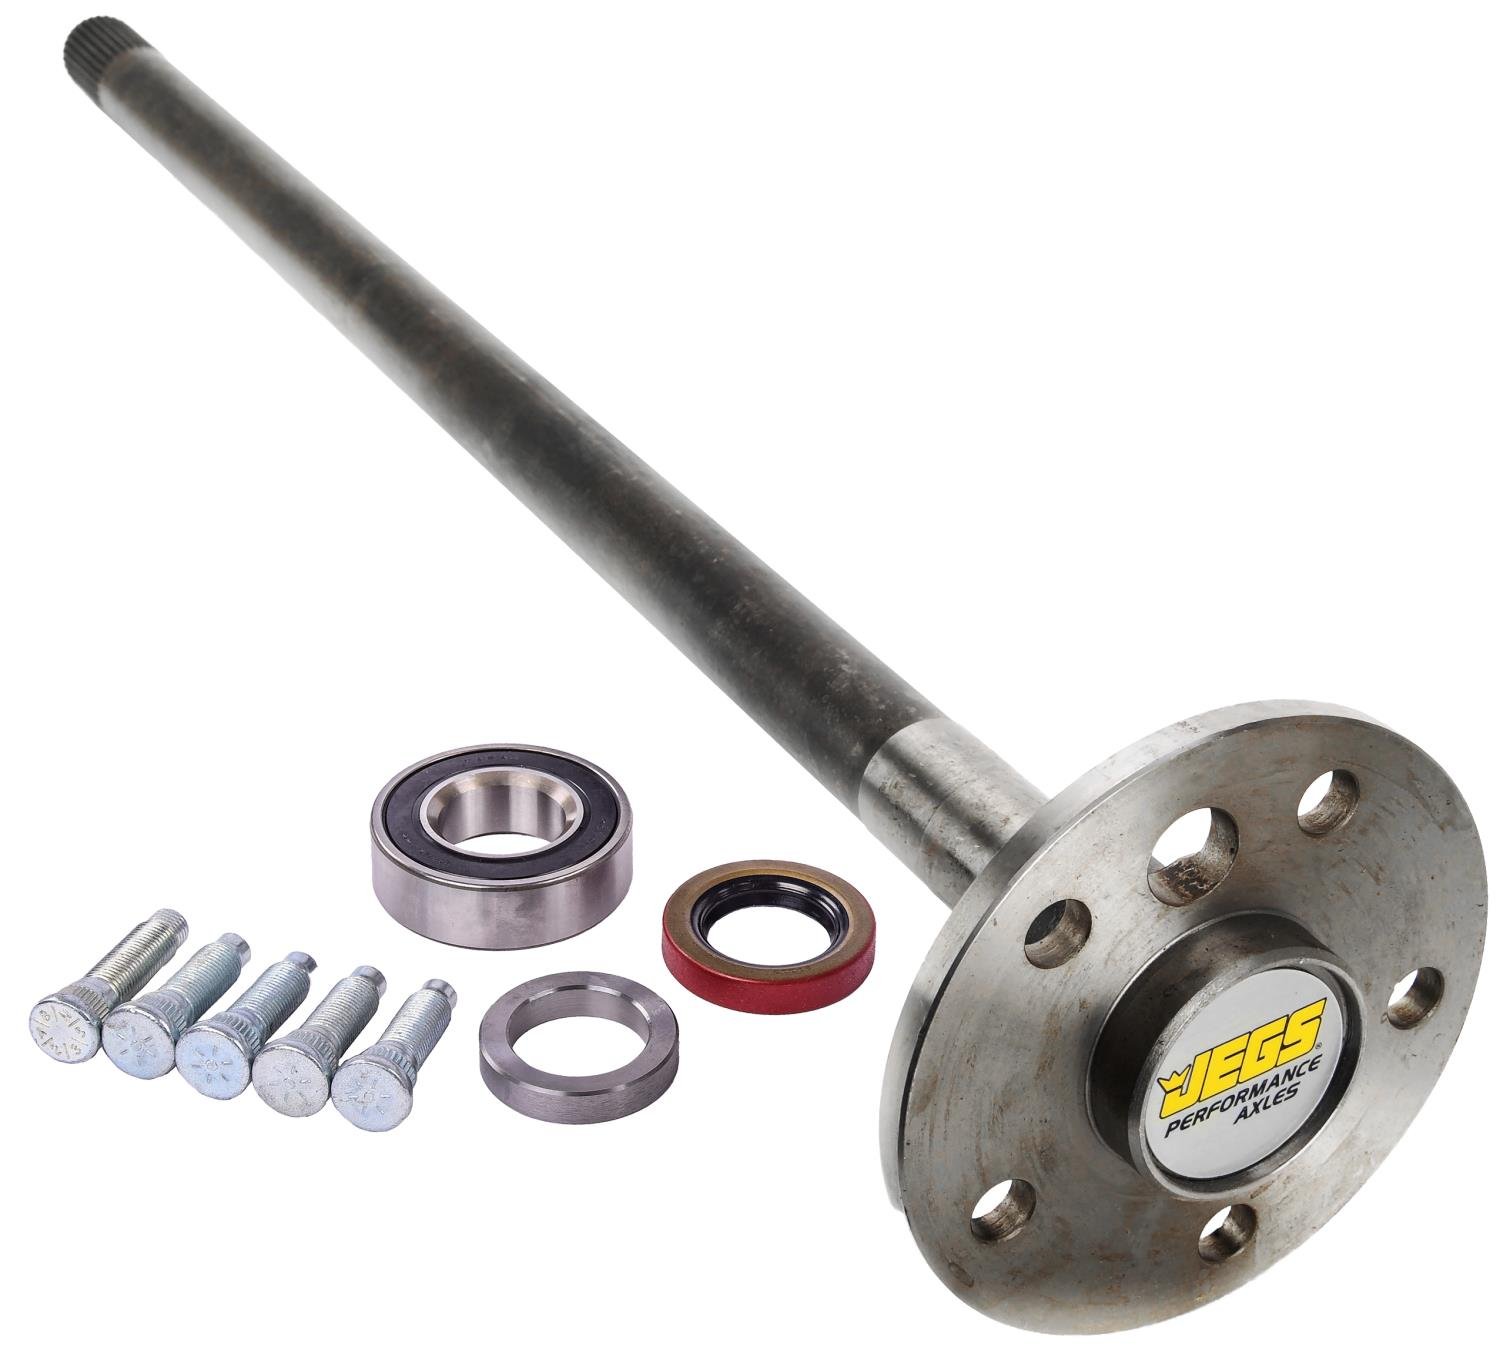 Rear Axle Shaft for 1967-1970 Ford Mustang & Mercury Cougar, Right/Passenger Side [Ford 9 in. 31-Spline]